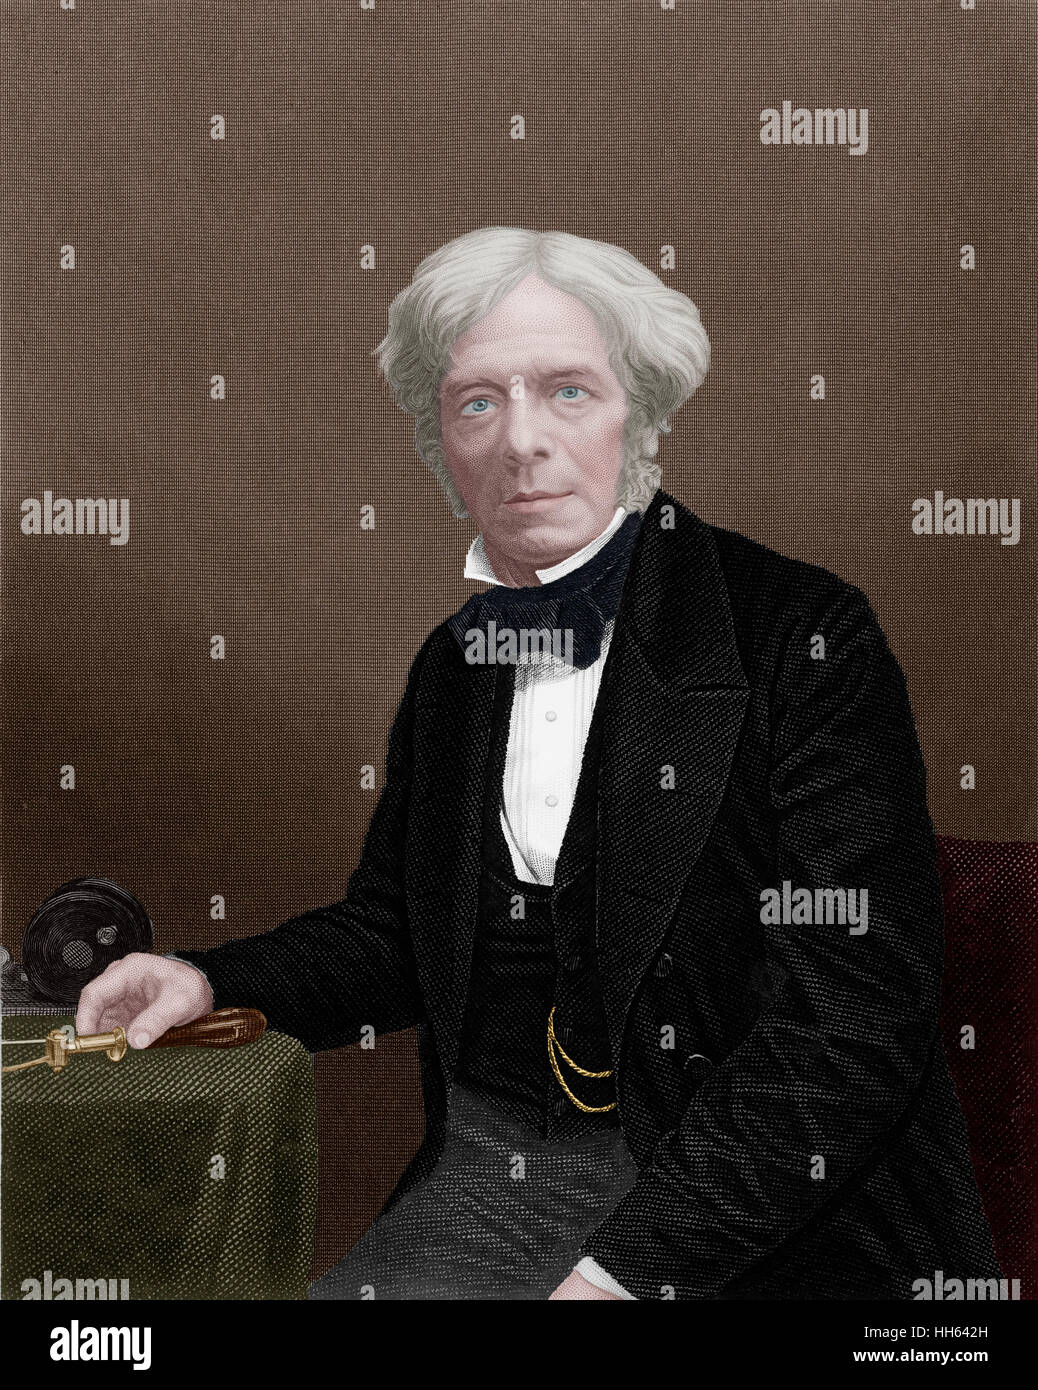 Michael Faraday (1791-1867) - English scientist - contributed to the study of electromagnetism and electrochemistry. His discoveries included the principles underlying electromagnetic induction, diamagnetism and electrolysis. Stock Photo